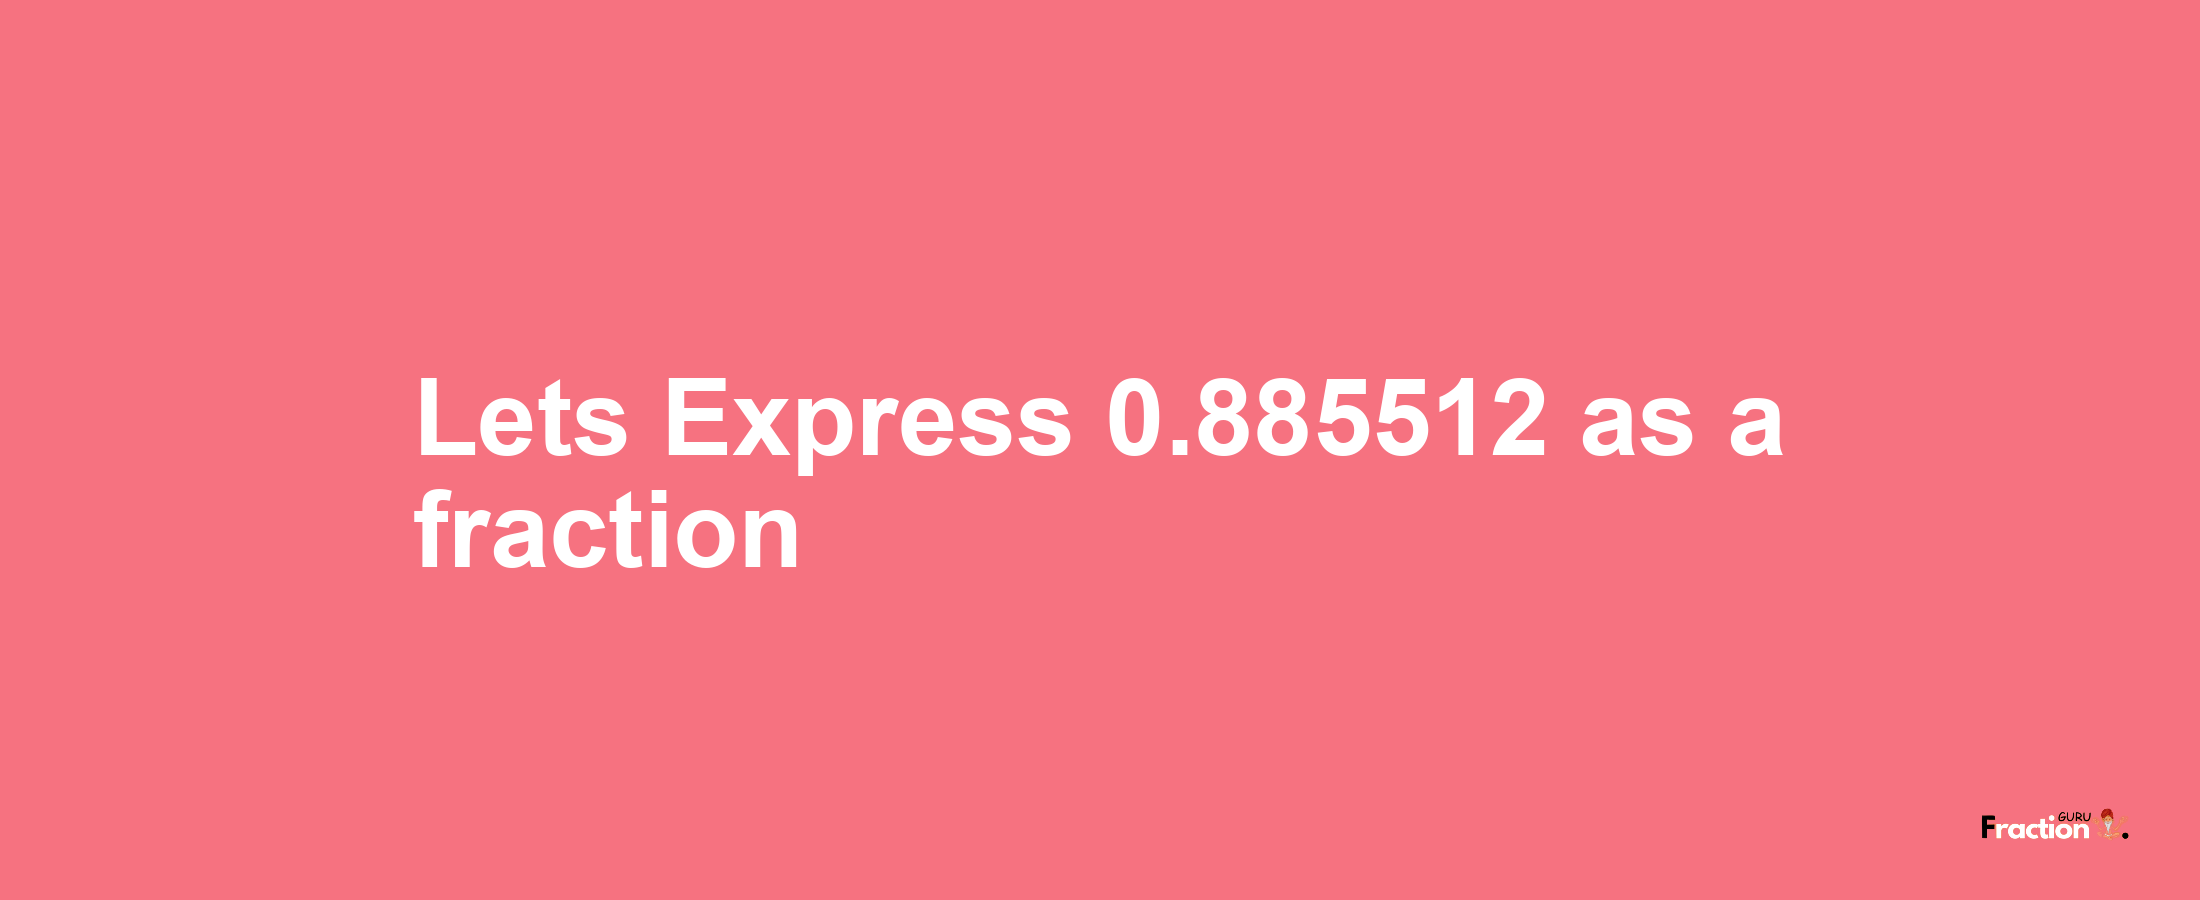 Lets Express 0.885512 as afraction